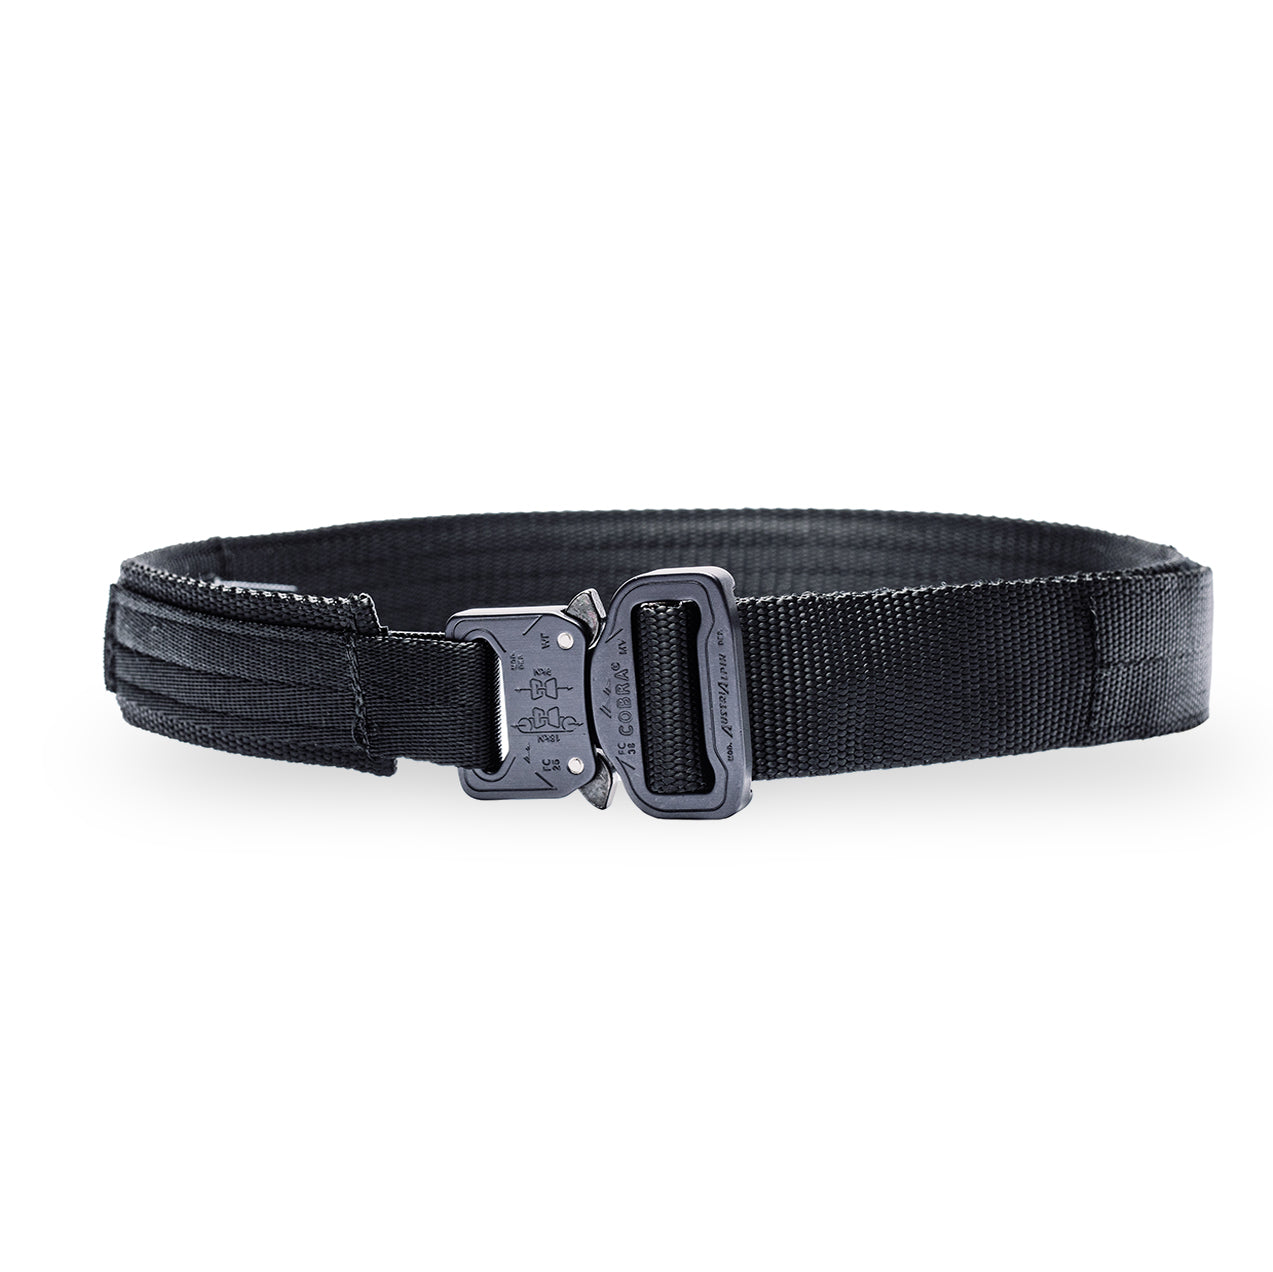 Blade-Tech’s Instructor's Tactical Belt with COBRA buckle shown in black nylon